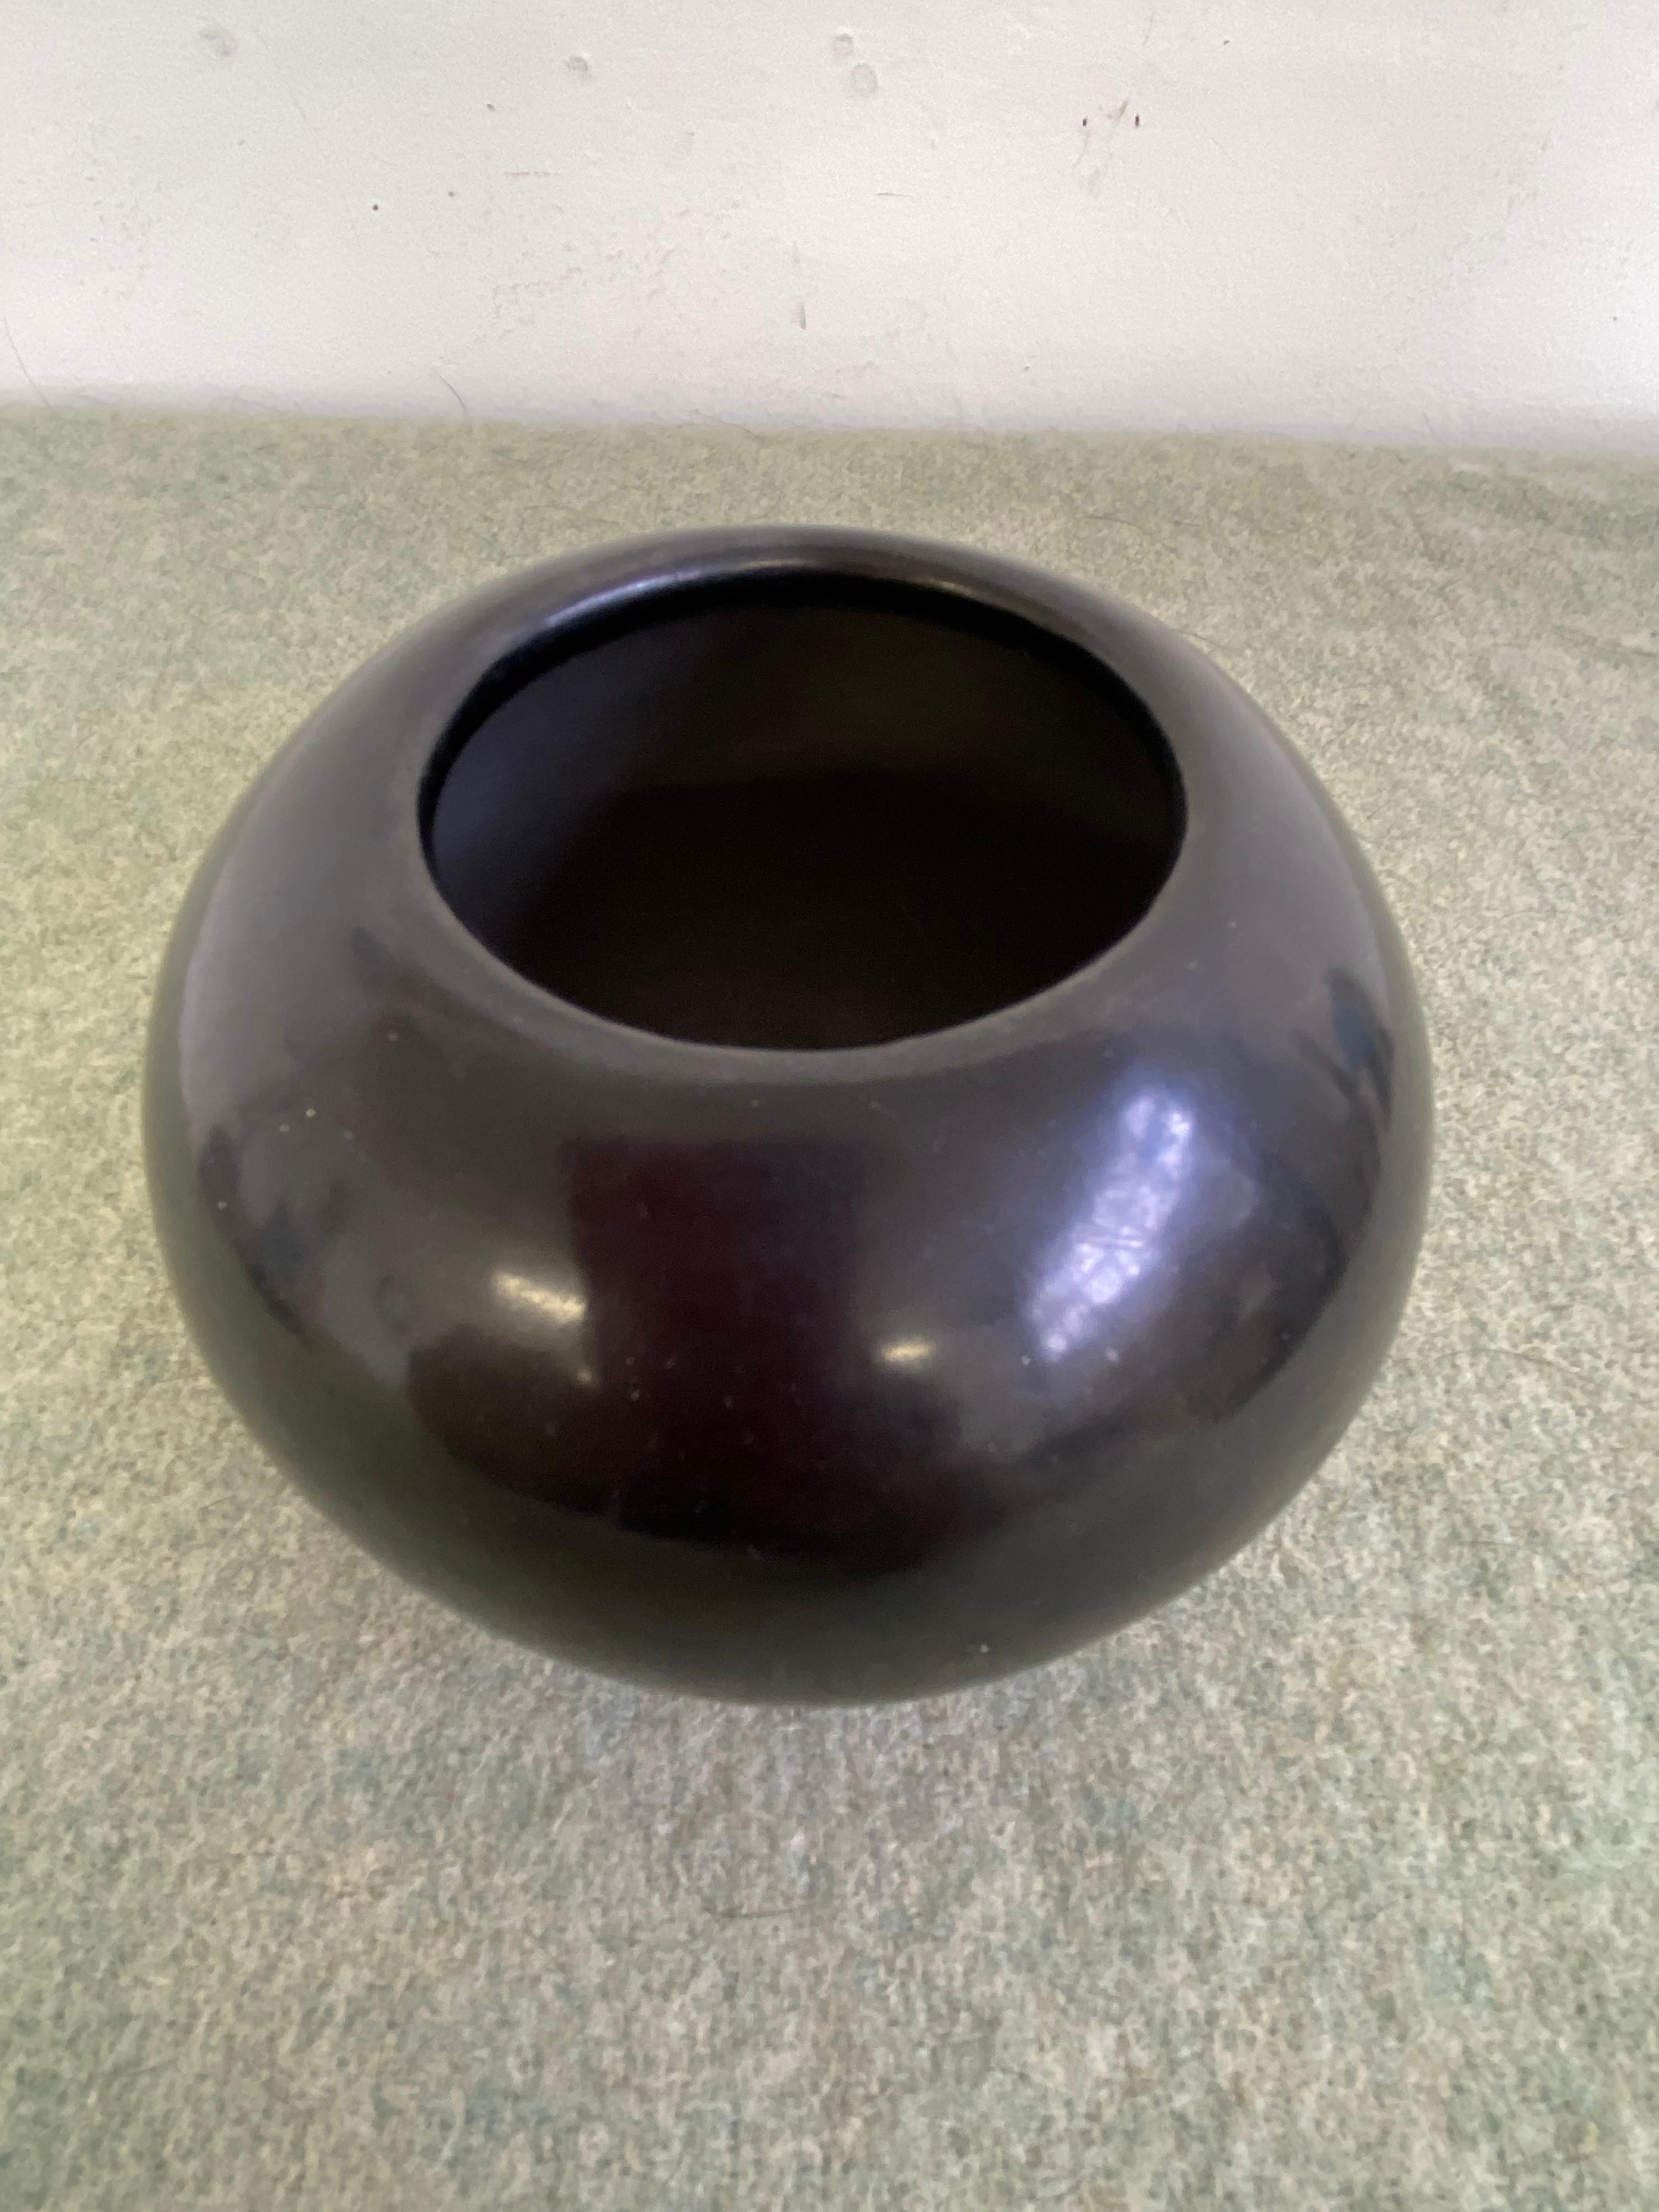 Maria Poveka (1887-1980) Native Clay with Traditional San Ildefonso Black Slip. Polished to a Medium High Finish. Signed Maria Poveka, pot dates to the 1950's. Maria the Potter of San Ildefonso, the most famous of the Pueblo Indian Potters who